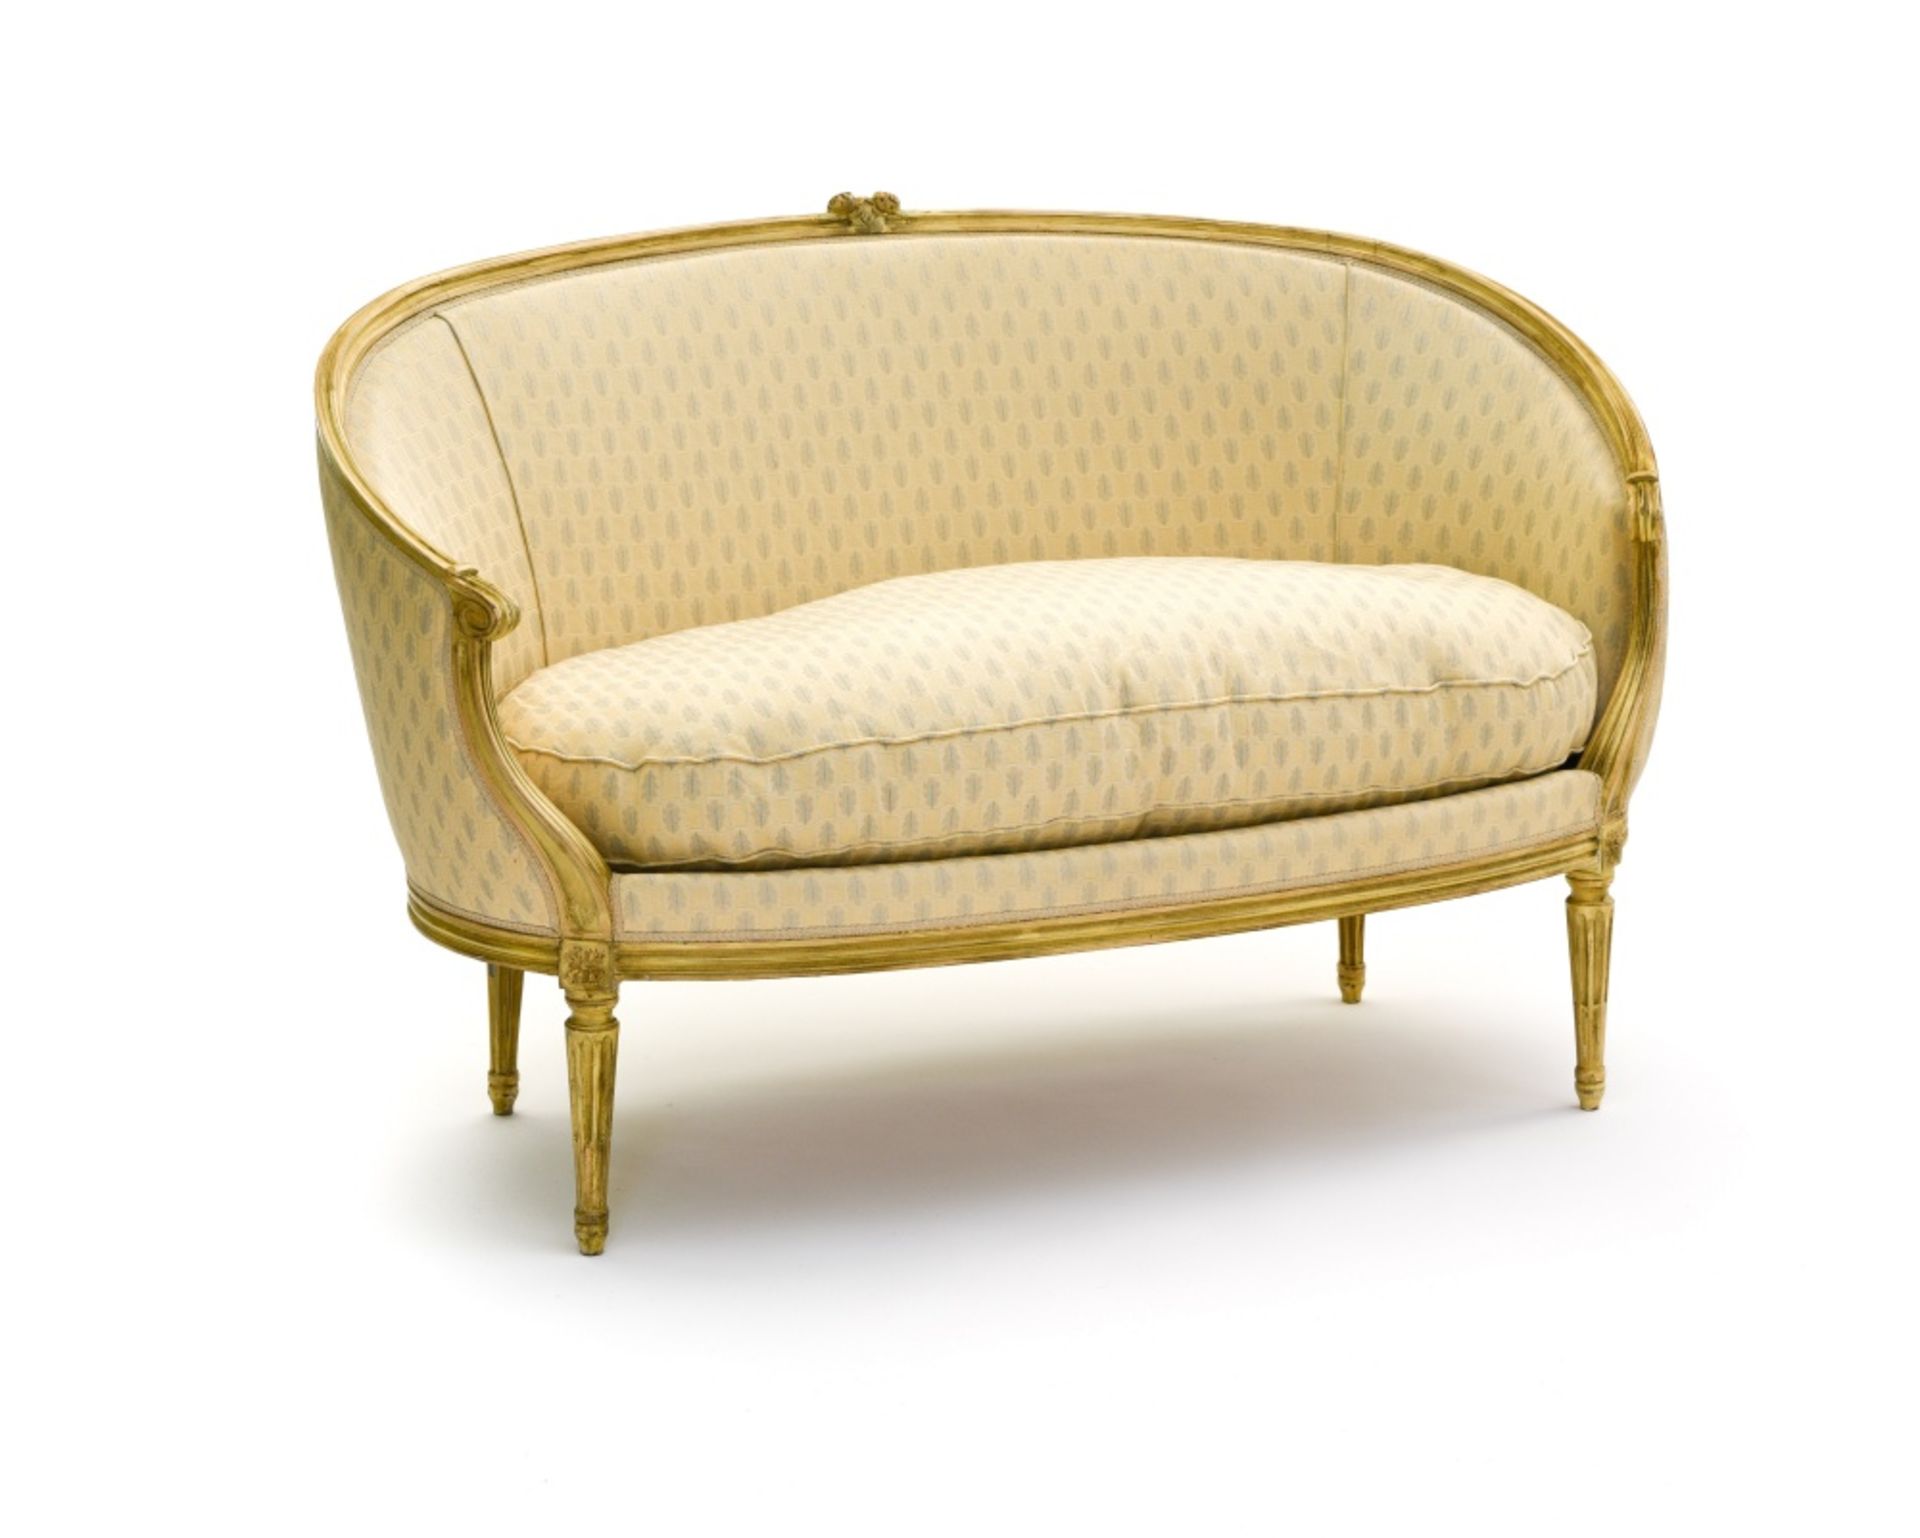 Louis XVI-style work Corbeille sofa, Weathered wood, recently upholstered with cream-colored fabric